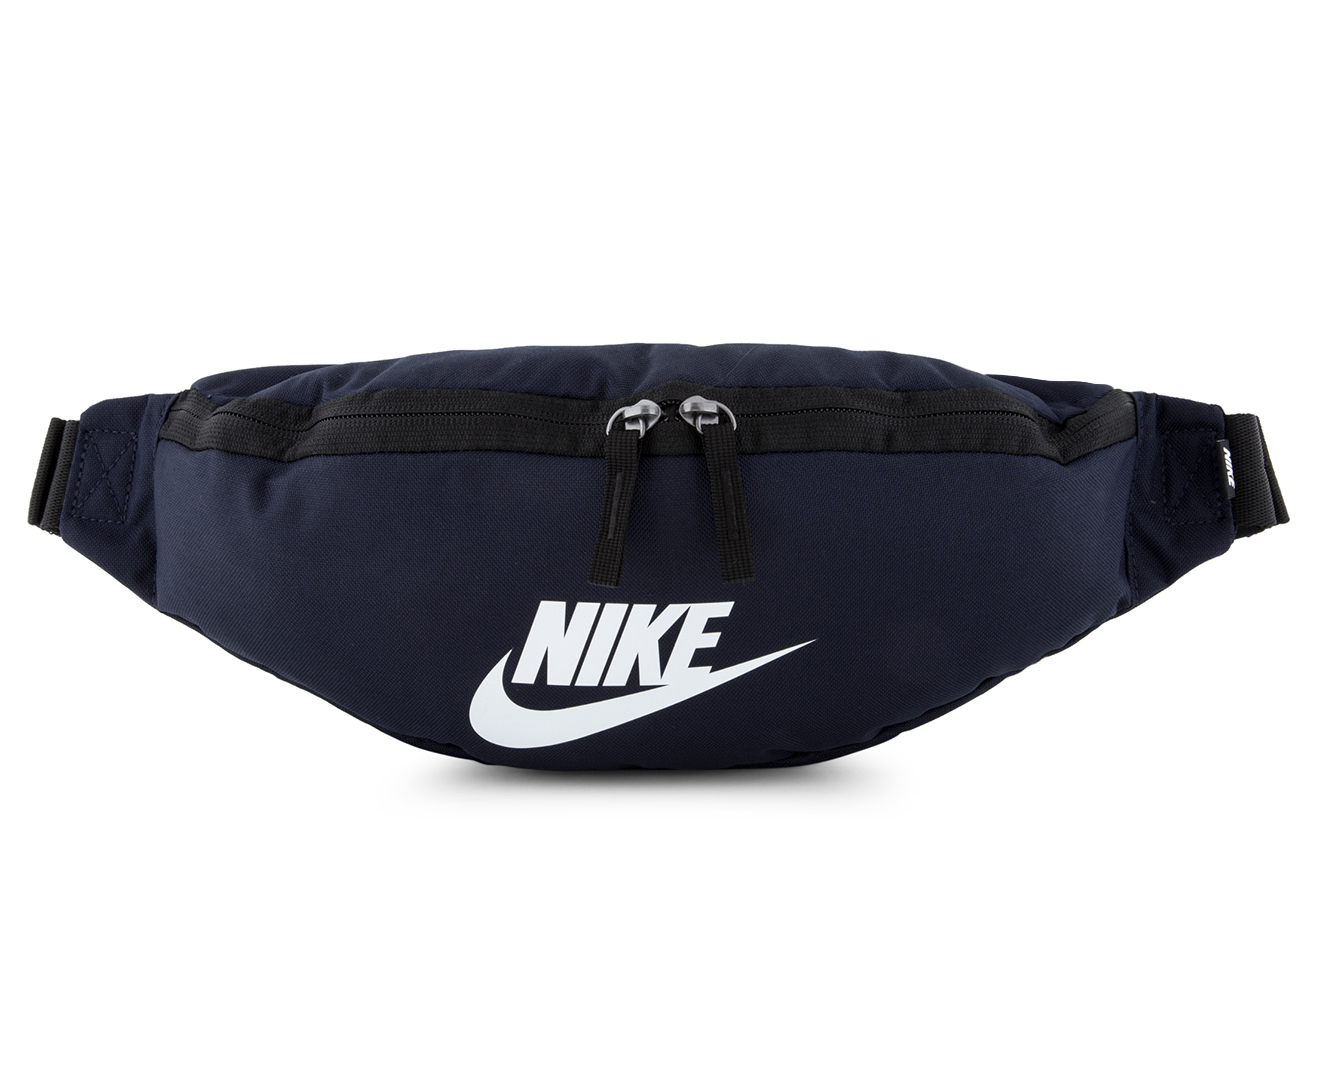 Nike Heritage Hip Pack Bumbag - Navy | Catch.co.nz